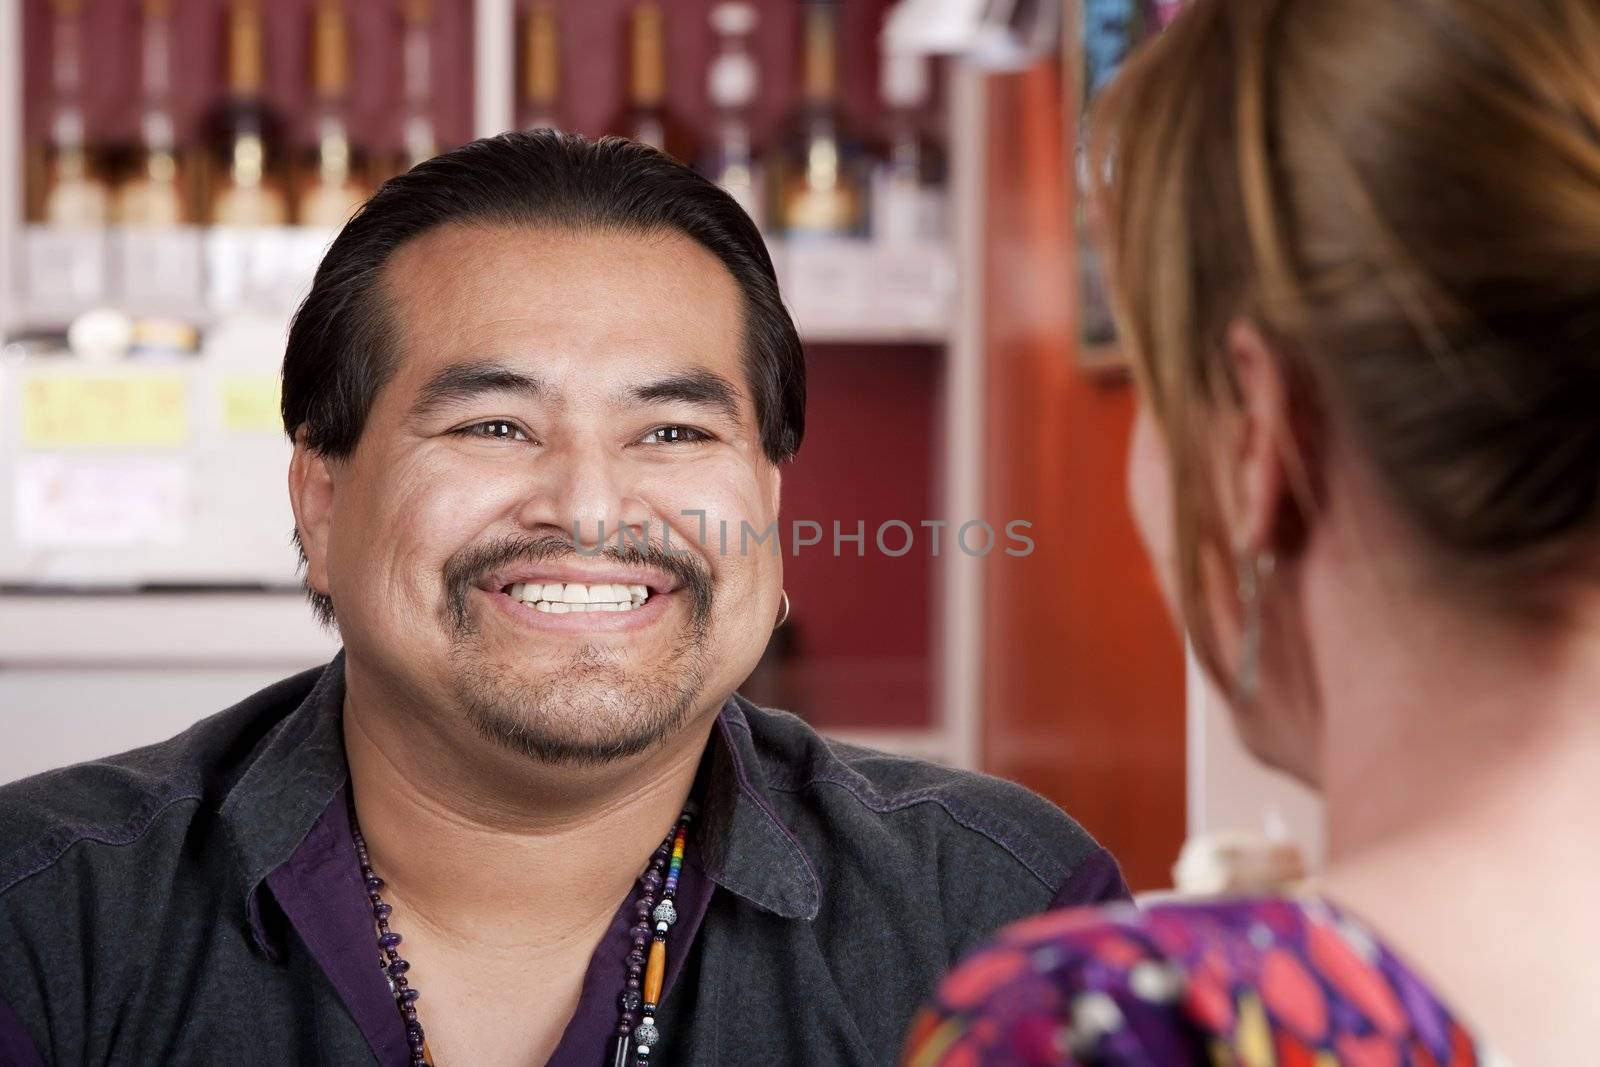 Native American man with female friend in restaurant by Creatista